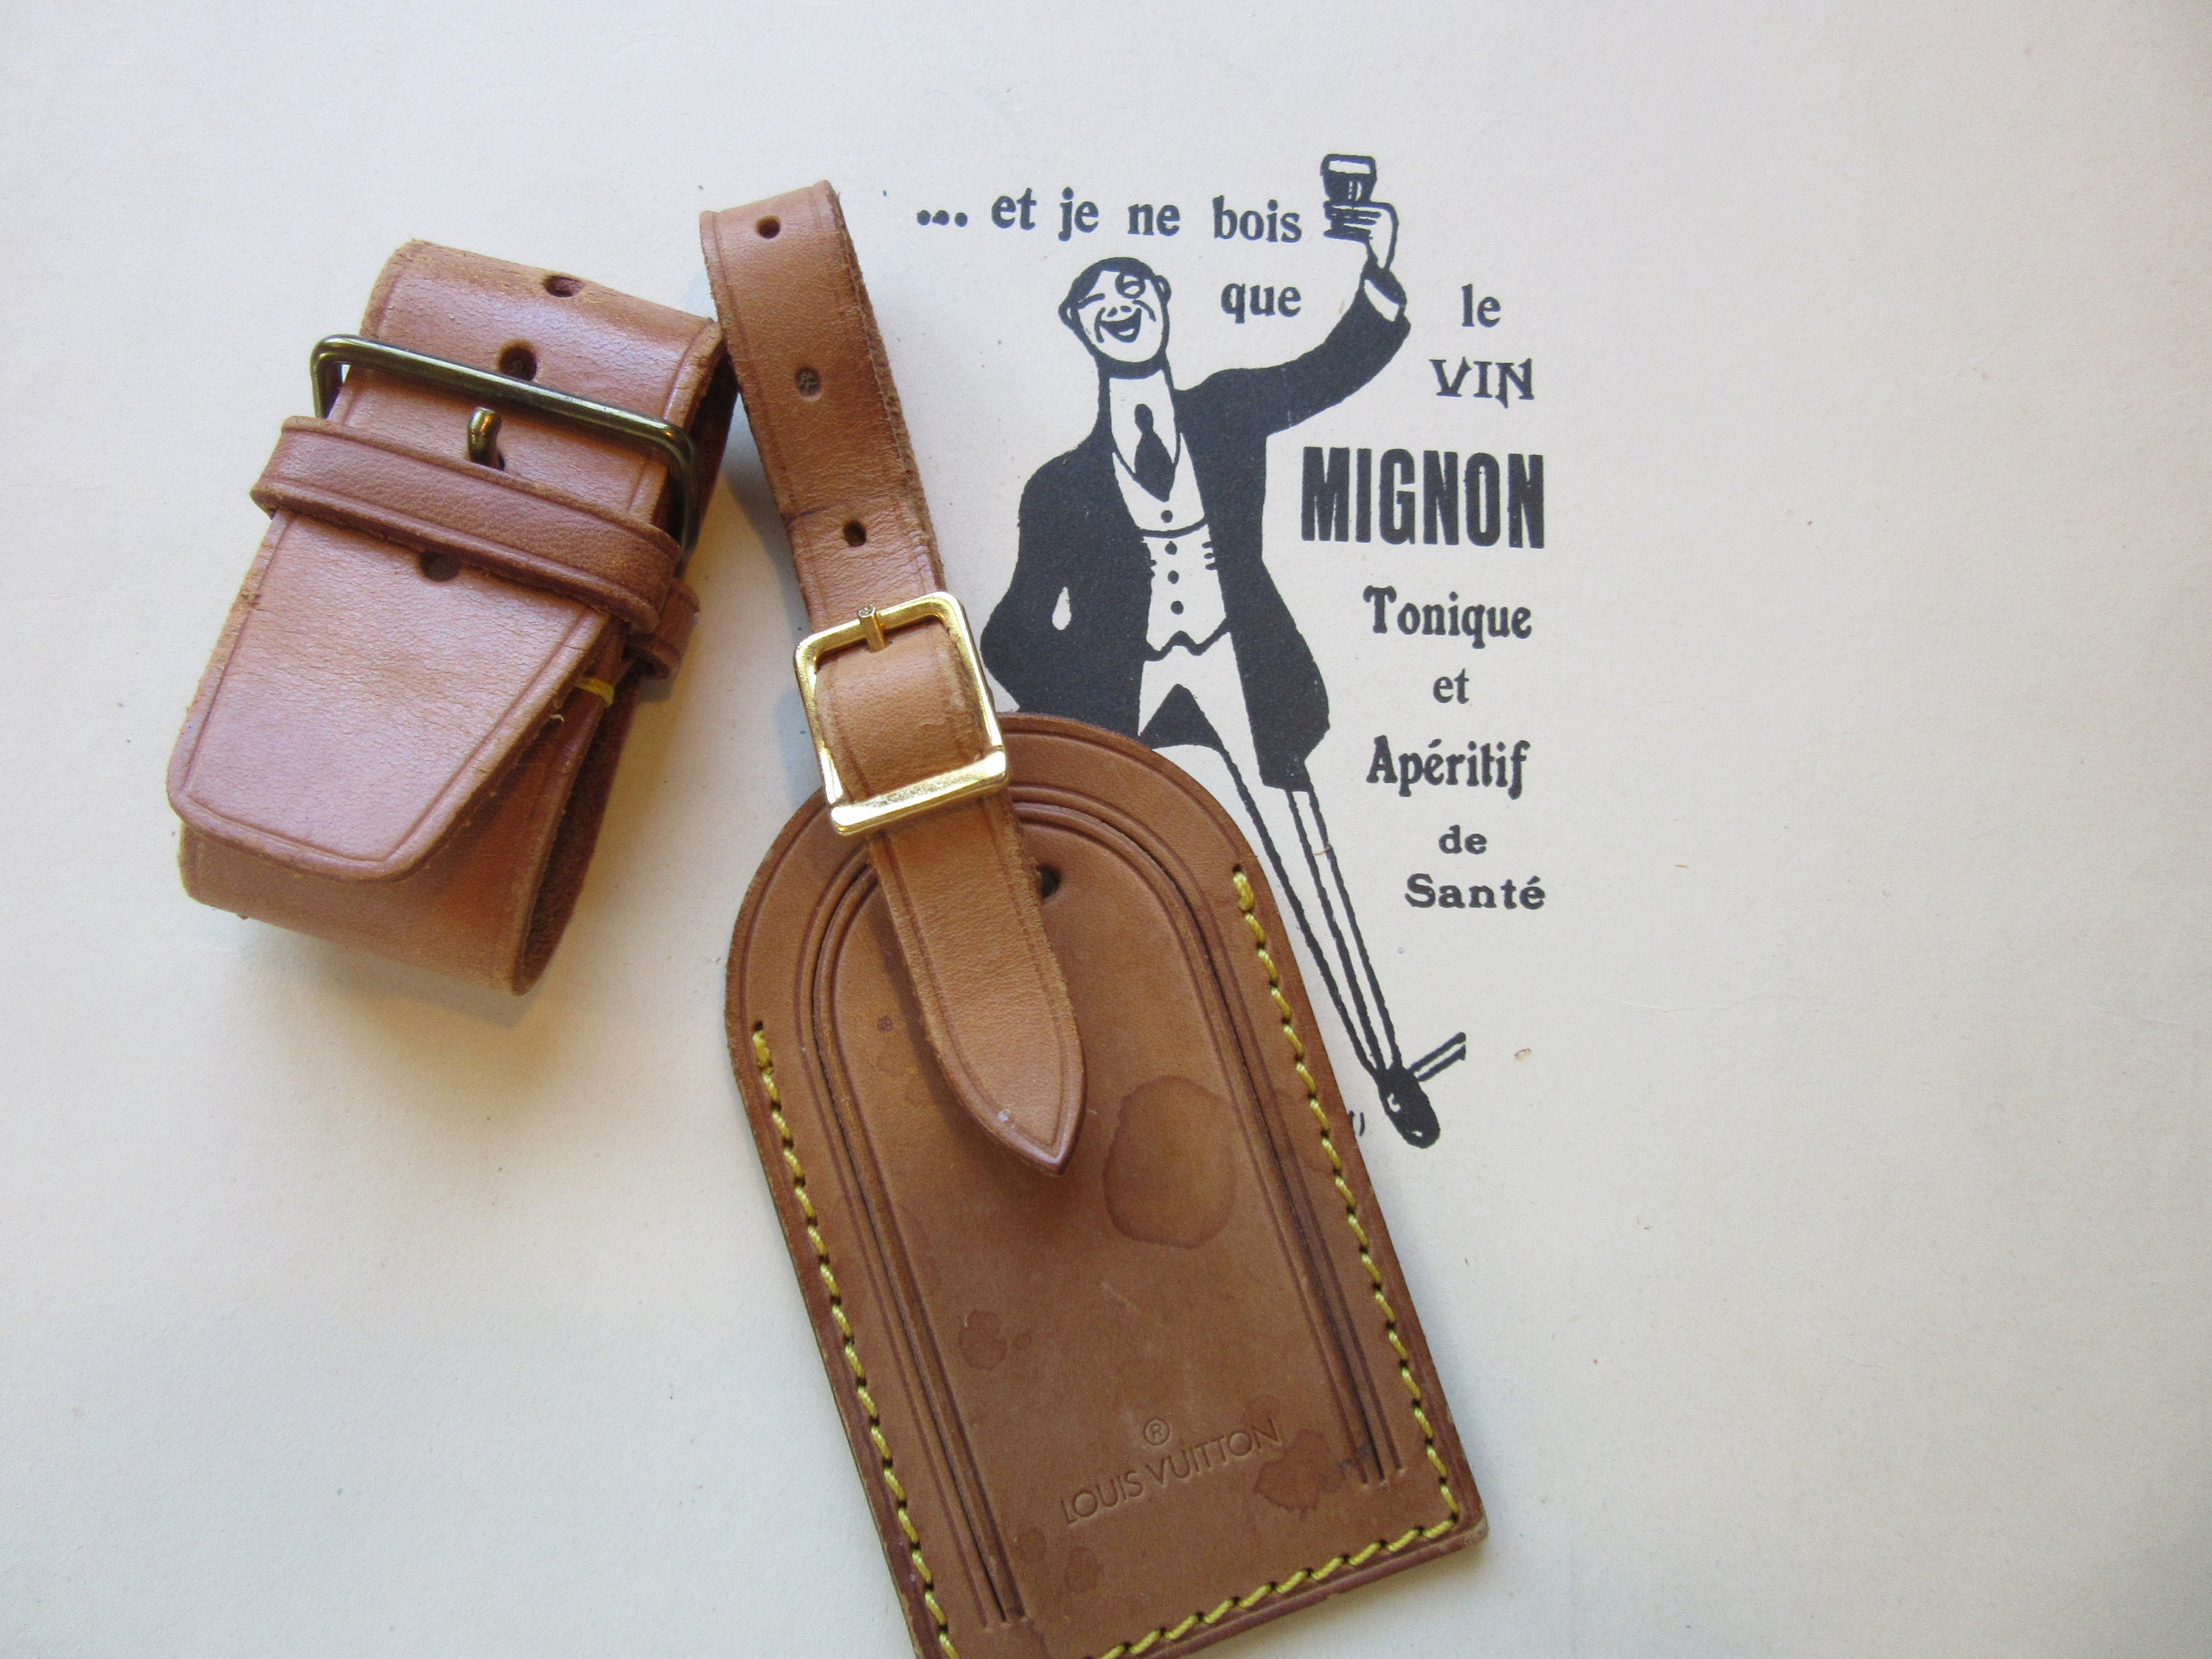 Rare choice 5 Louis Vuitton Luggage Tag Vintage Leather Made 